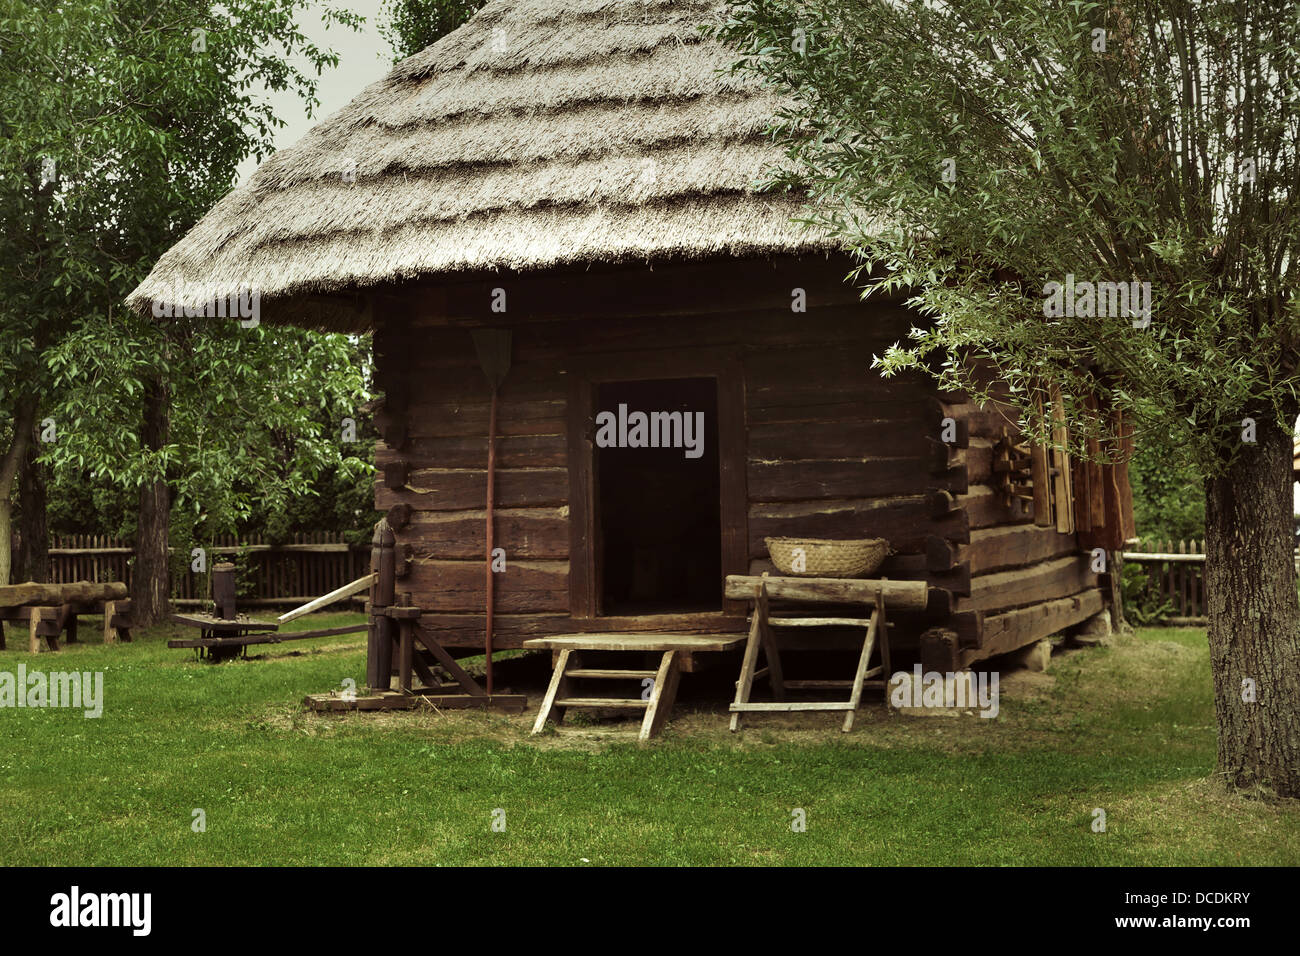 An old and rustic wooden house Stock Photo